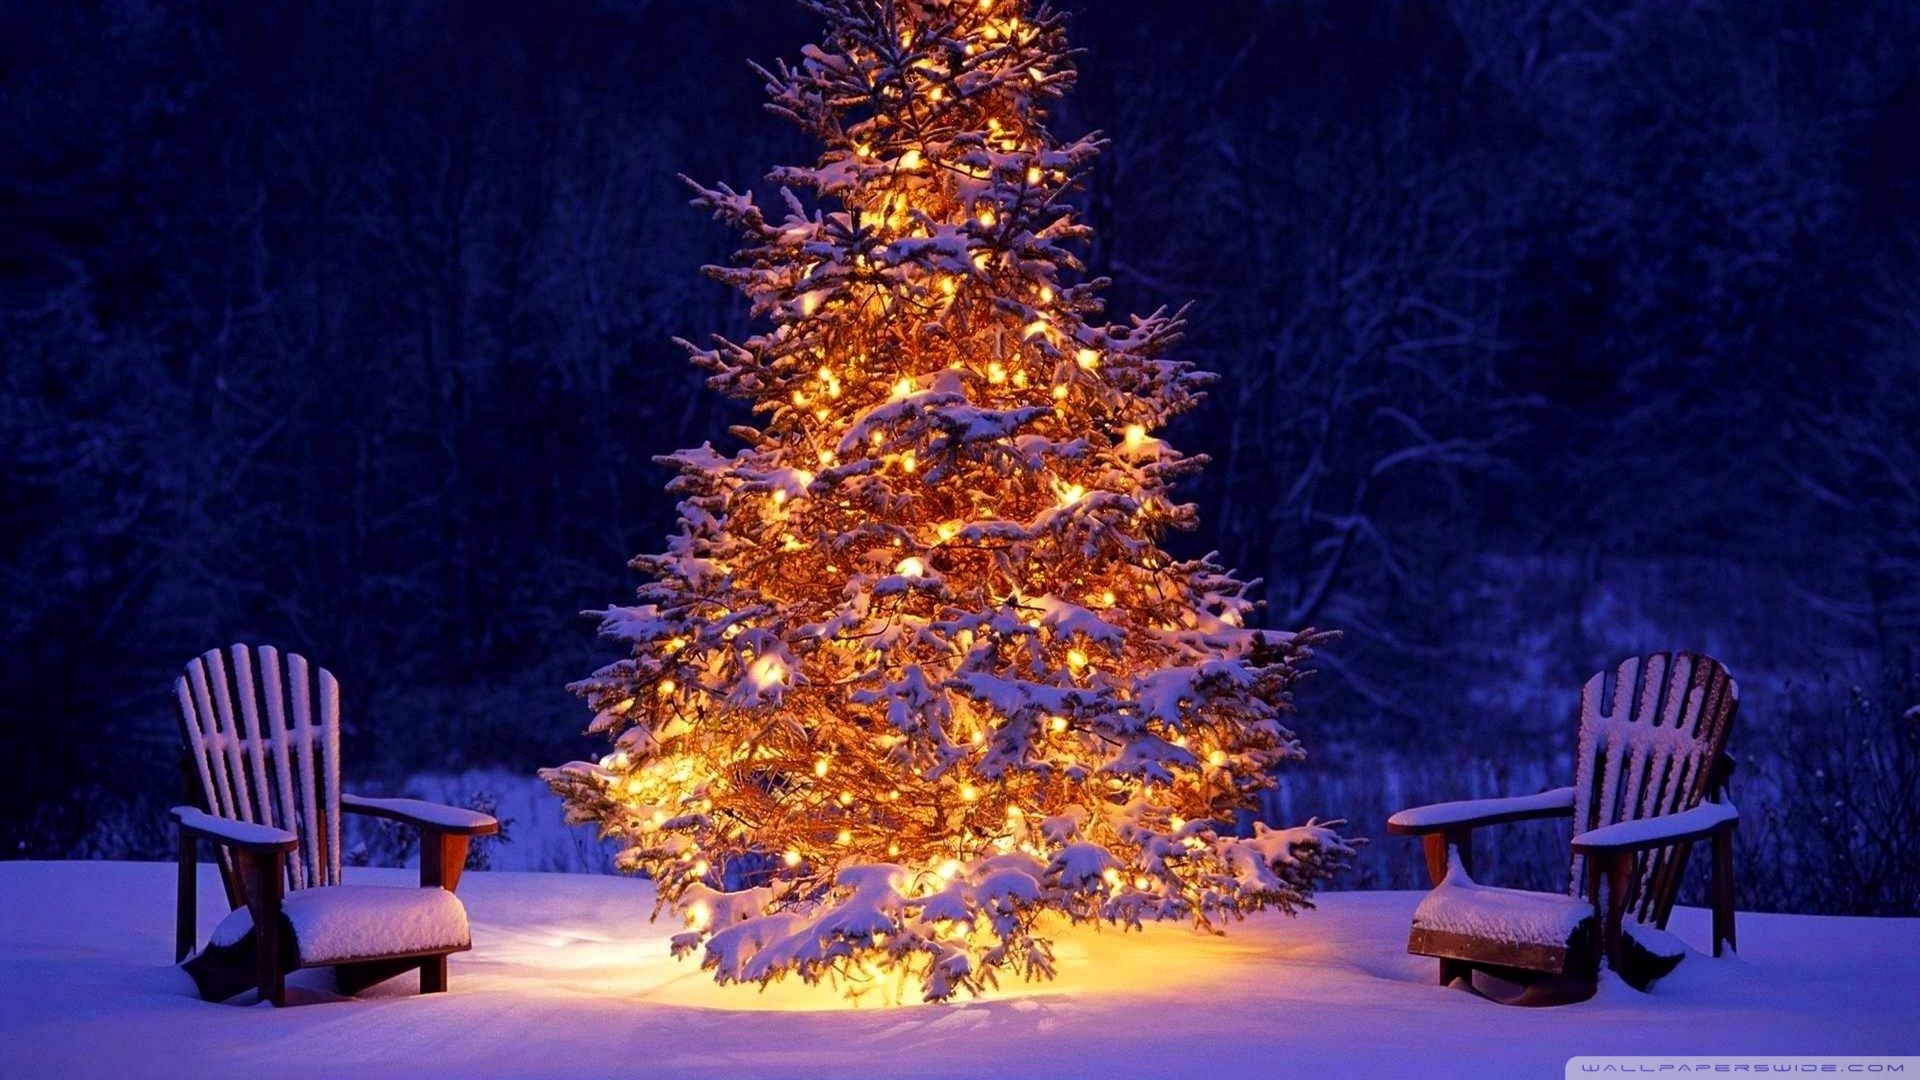 christmas outdoor decorations wallpaper 1920x1080